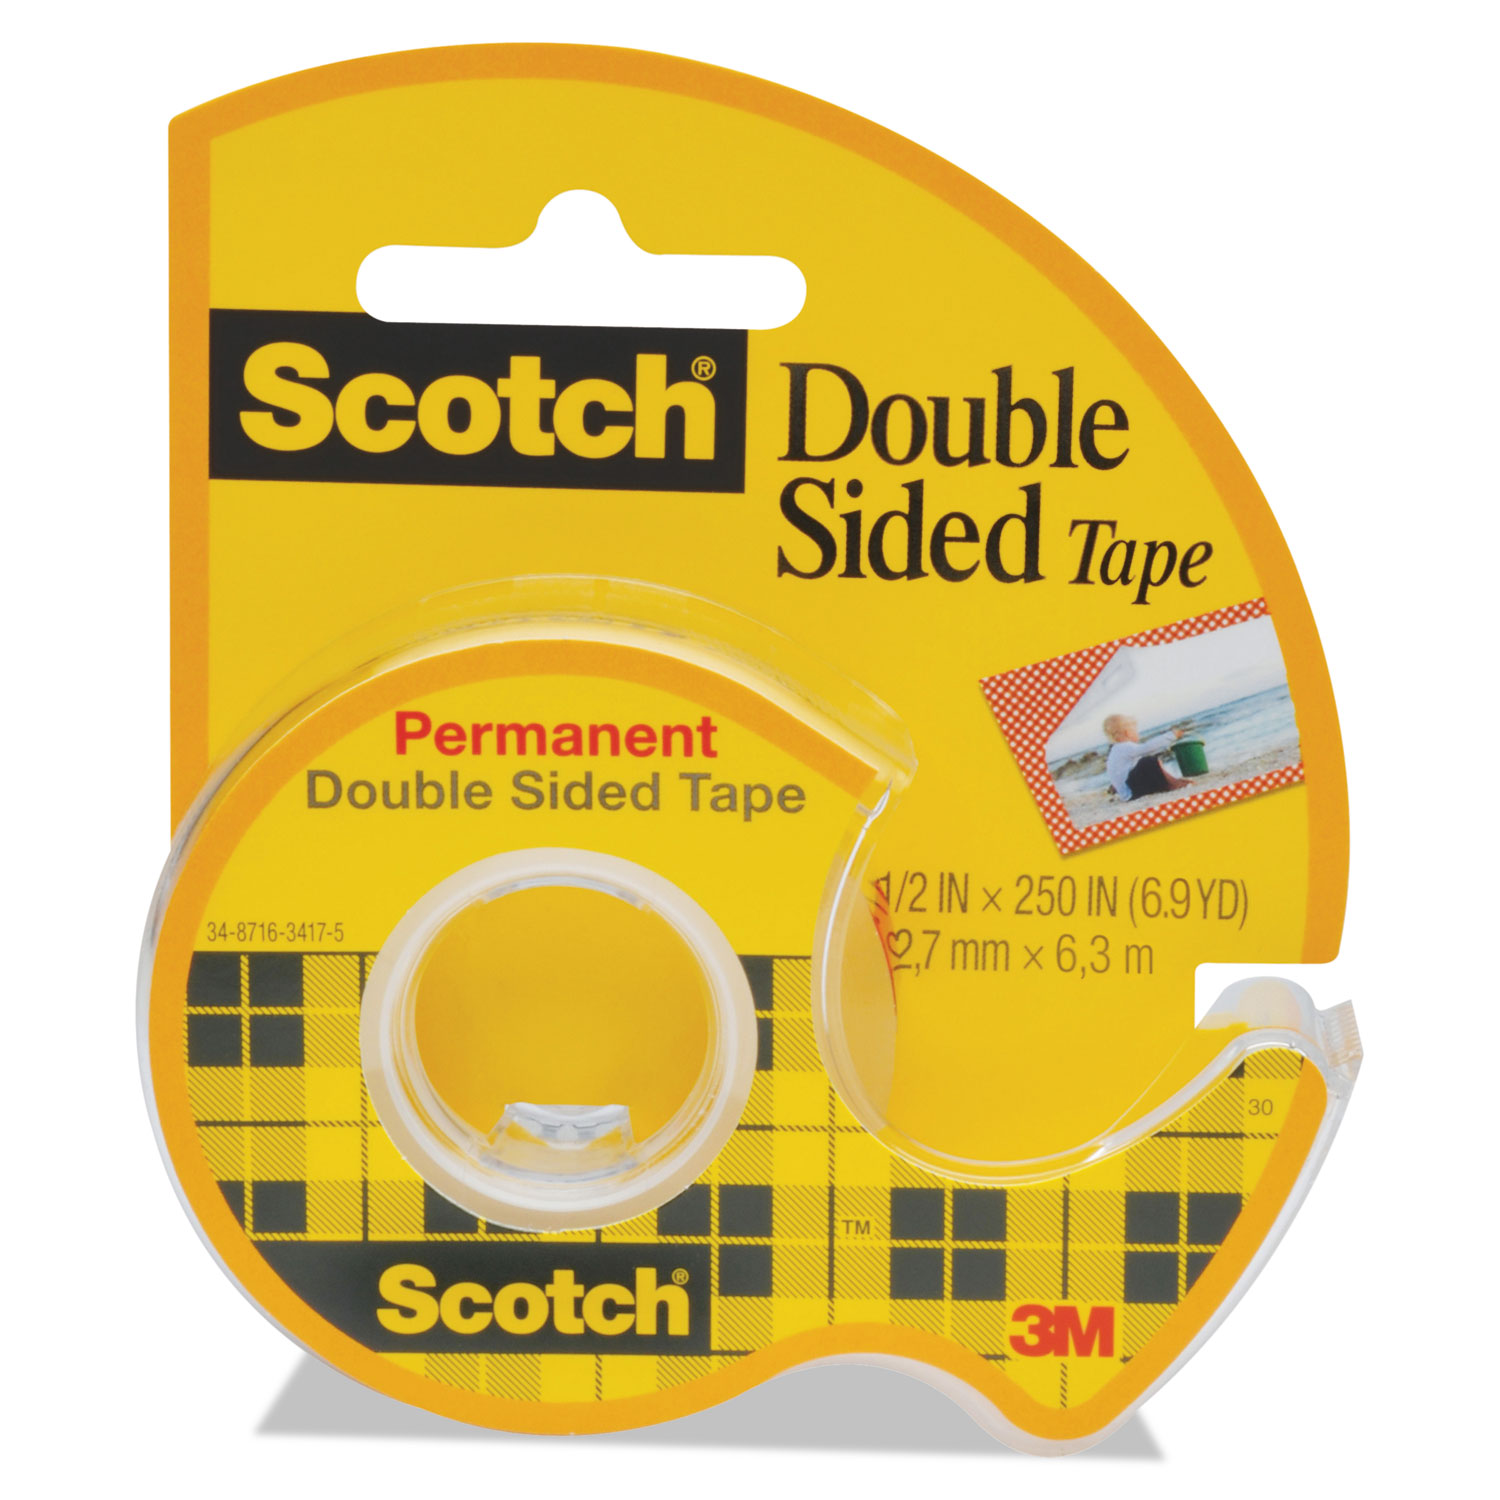  Scotch 136 Double-Sided Permanent Tape in Handheld Dispenser, 1 Core, 0.5 x 20.83 ft, Clear (MMM136) 